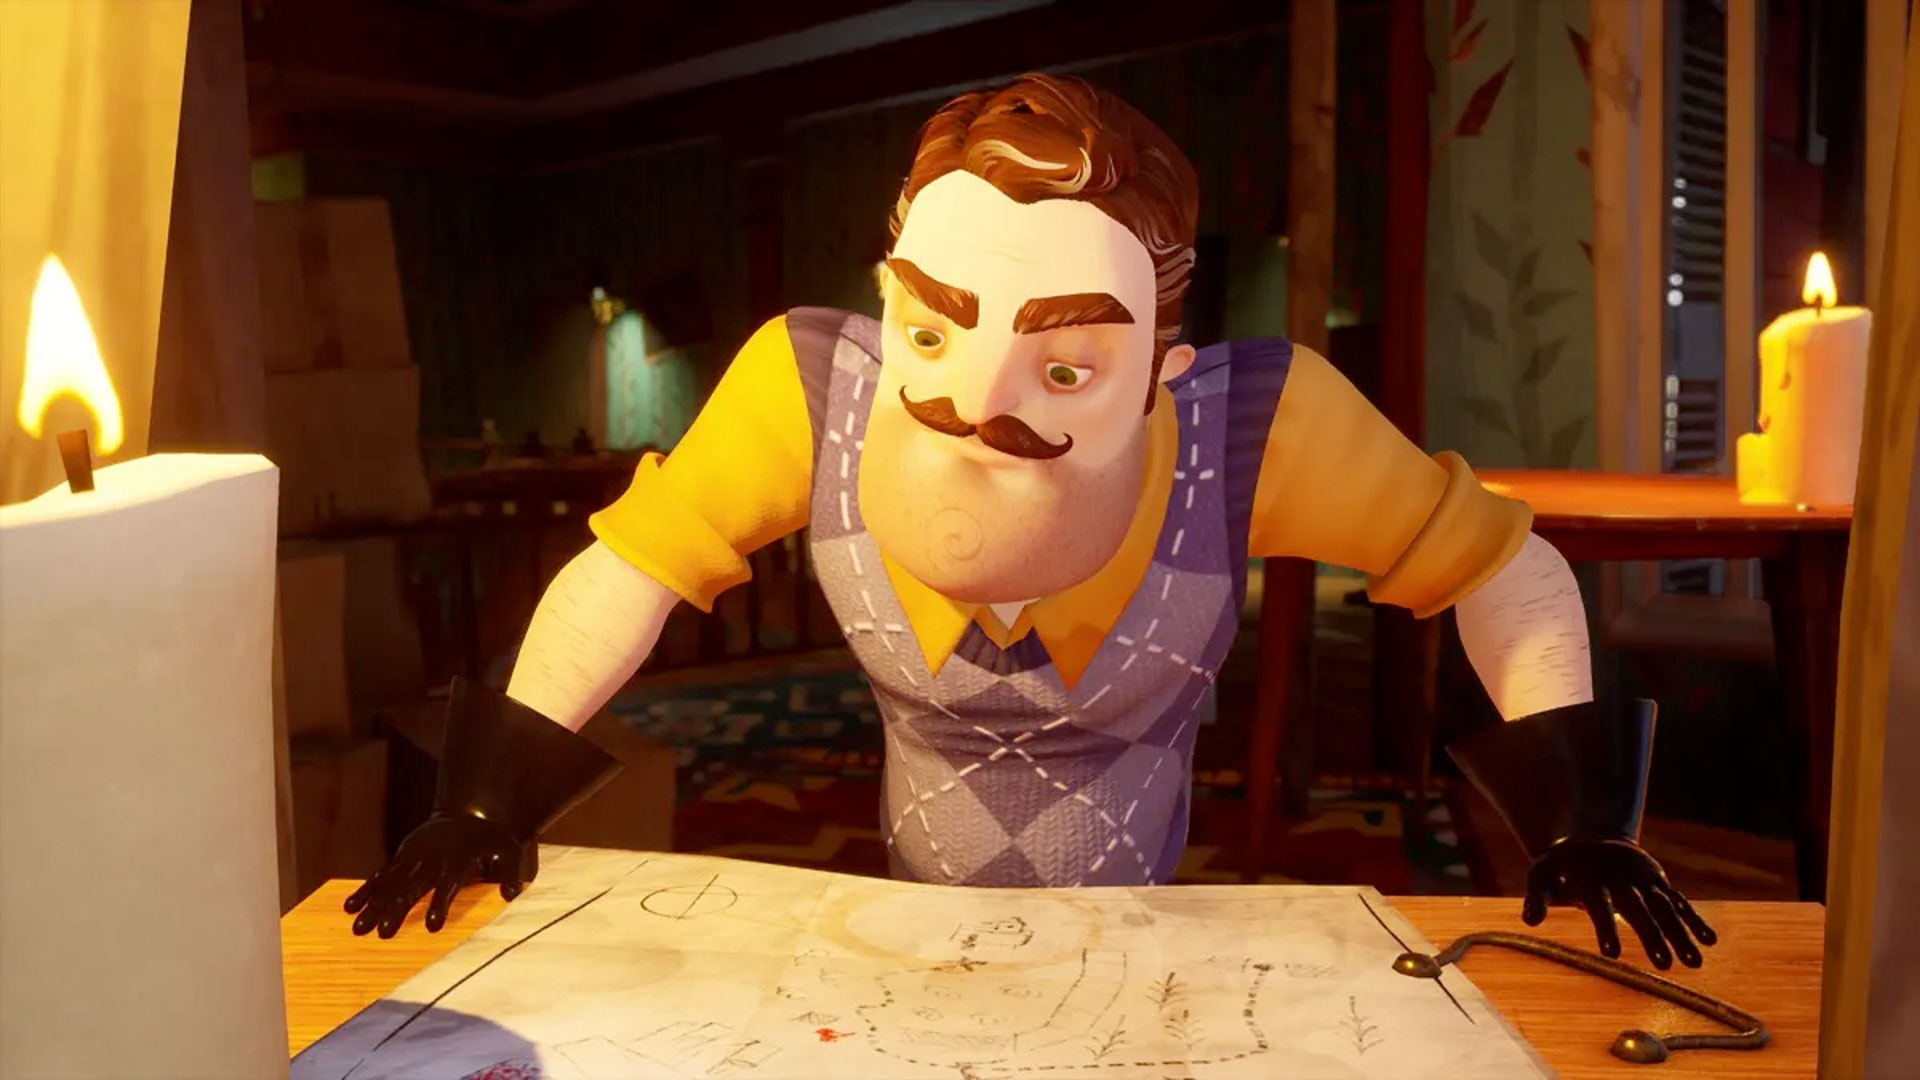 hello-neighbor-2-launches-dec-6-but-you-can-play-the-beta-now-9to5toys